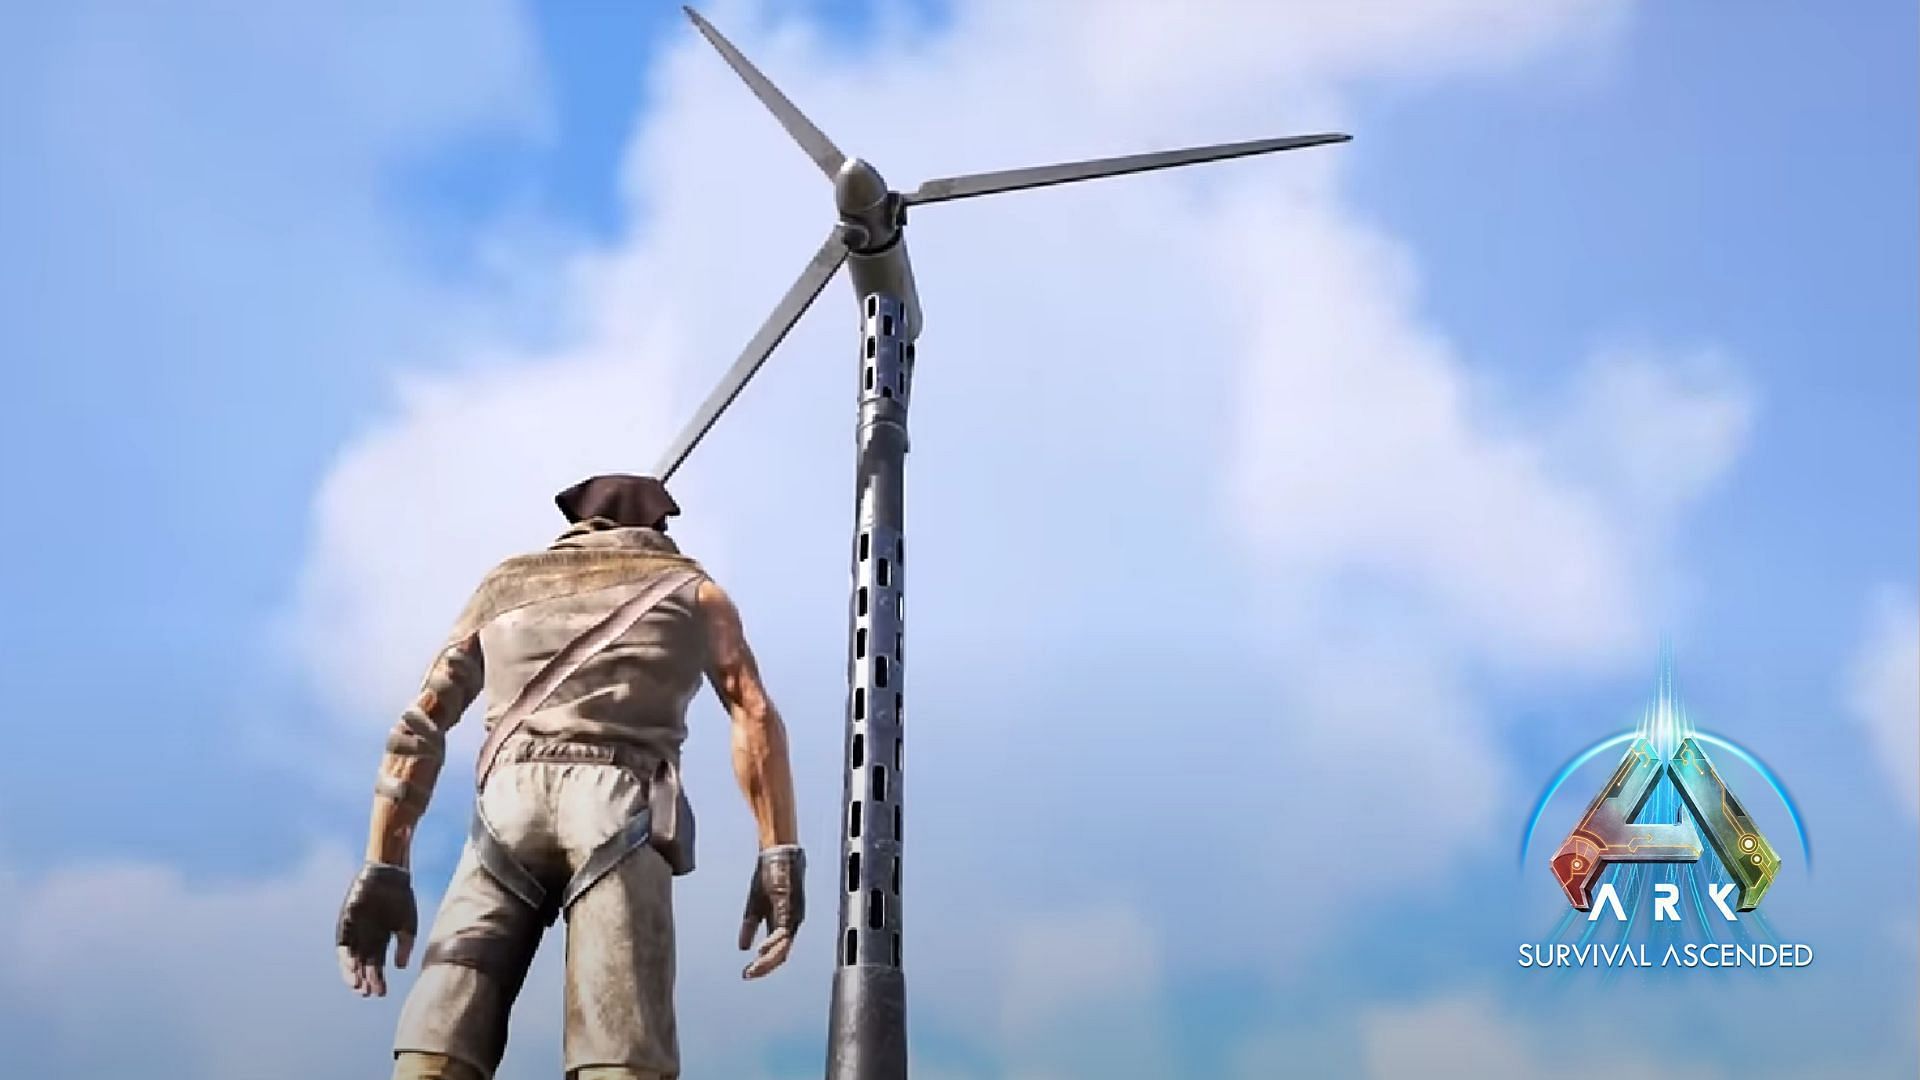 You can use the wind turbines to generate electricity (Image via Studio Wildcard)